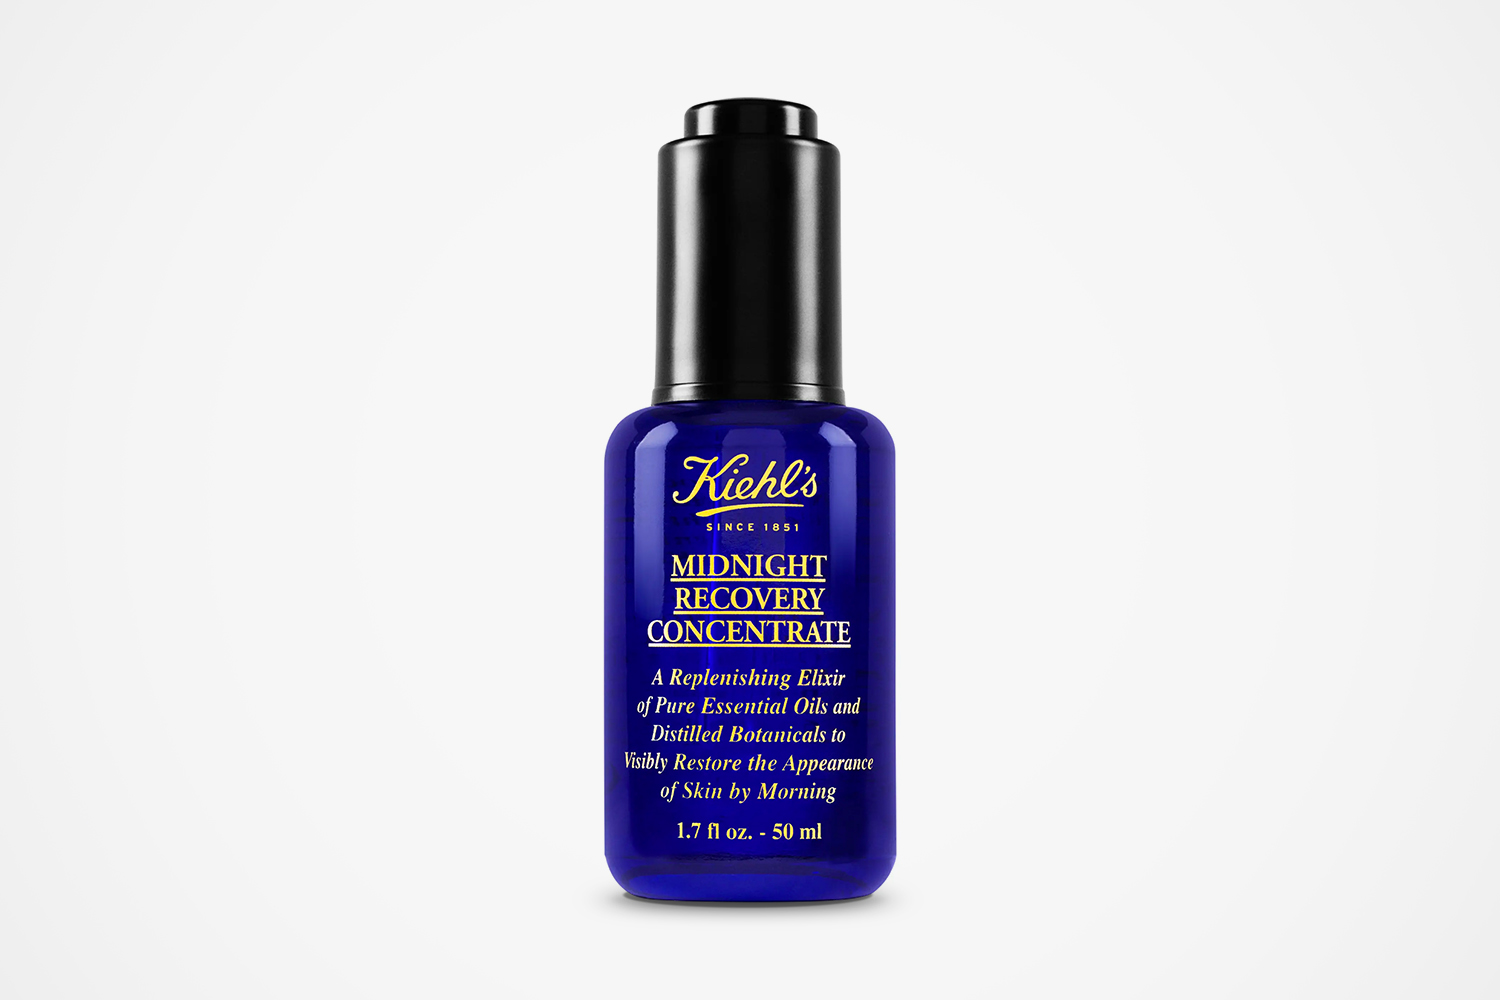 Nordstrom Kiehls Midnight Recovery Concentrate Face Oil